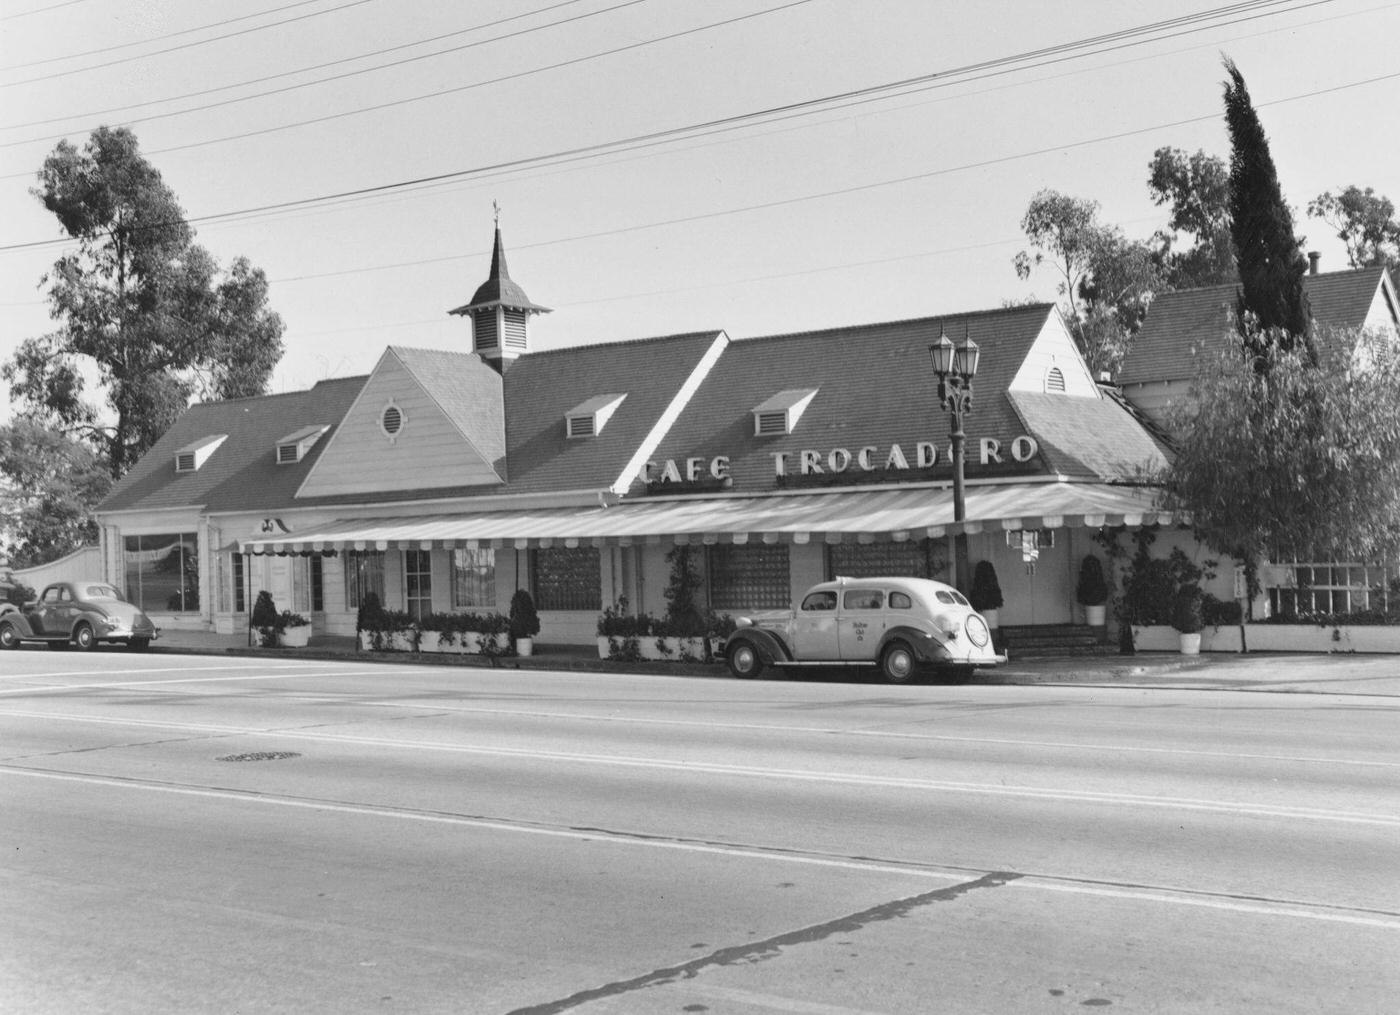 The exterior of the 'Cafe Trocadero', a nightclub on Sunset Strip, a stretch of Sunset Boulevard, in West Hollywood, 1937.